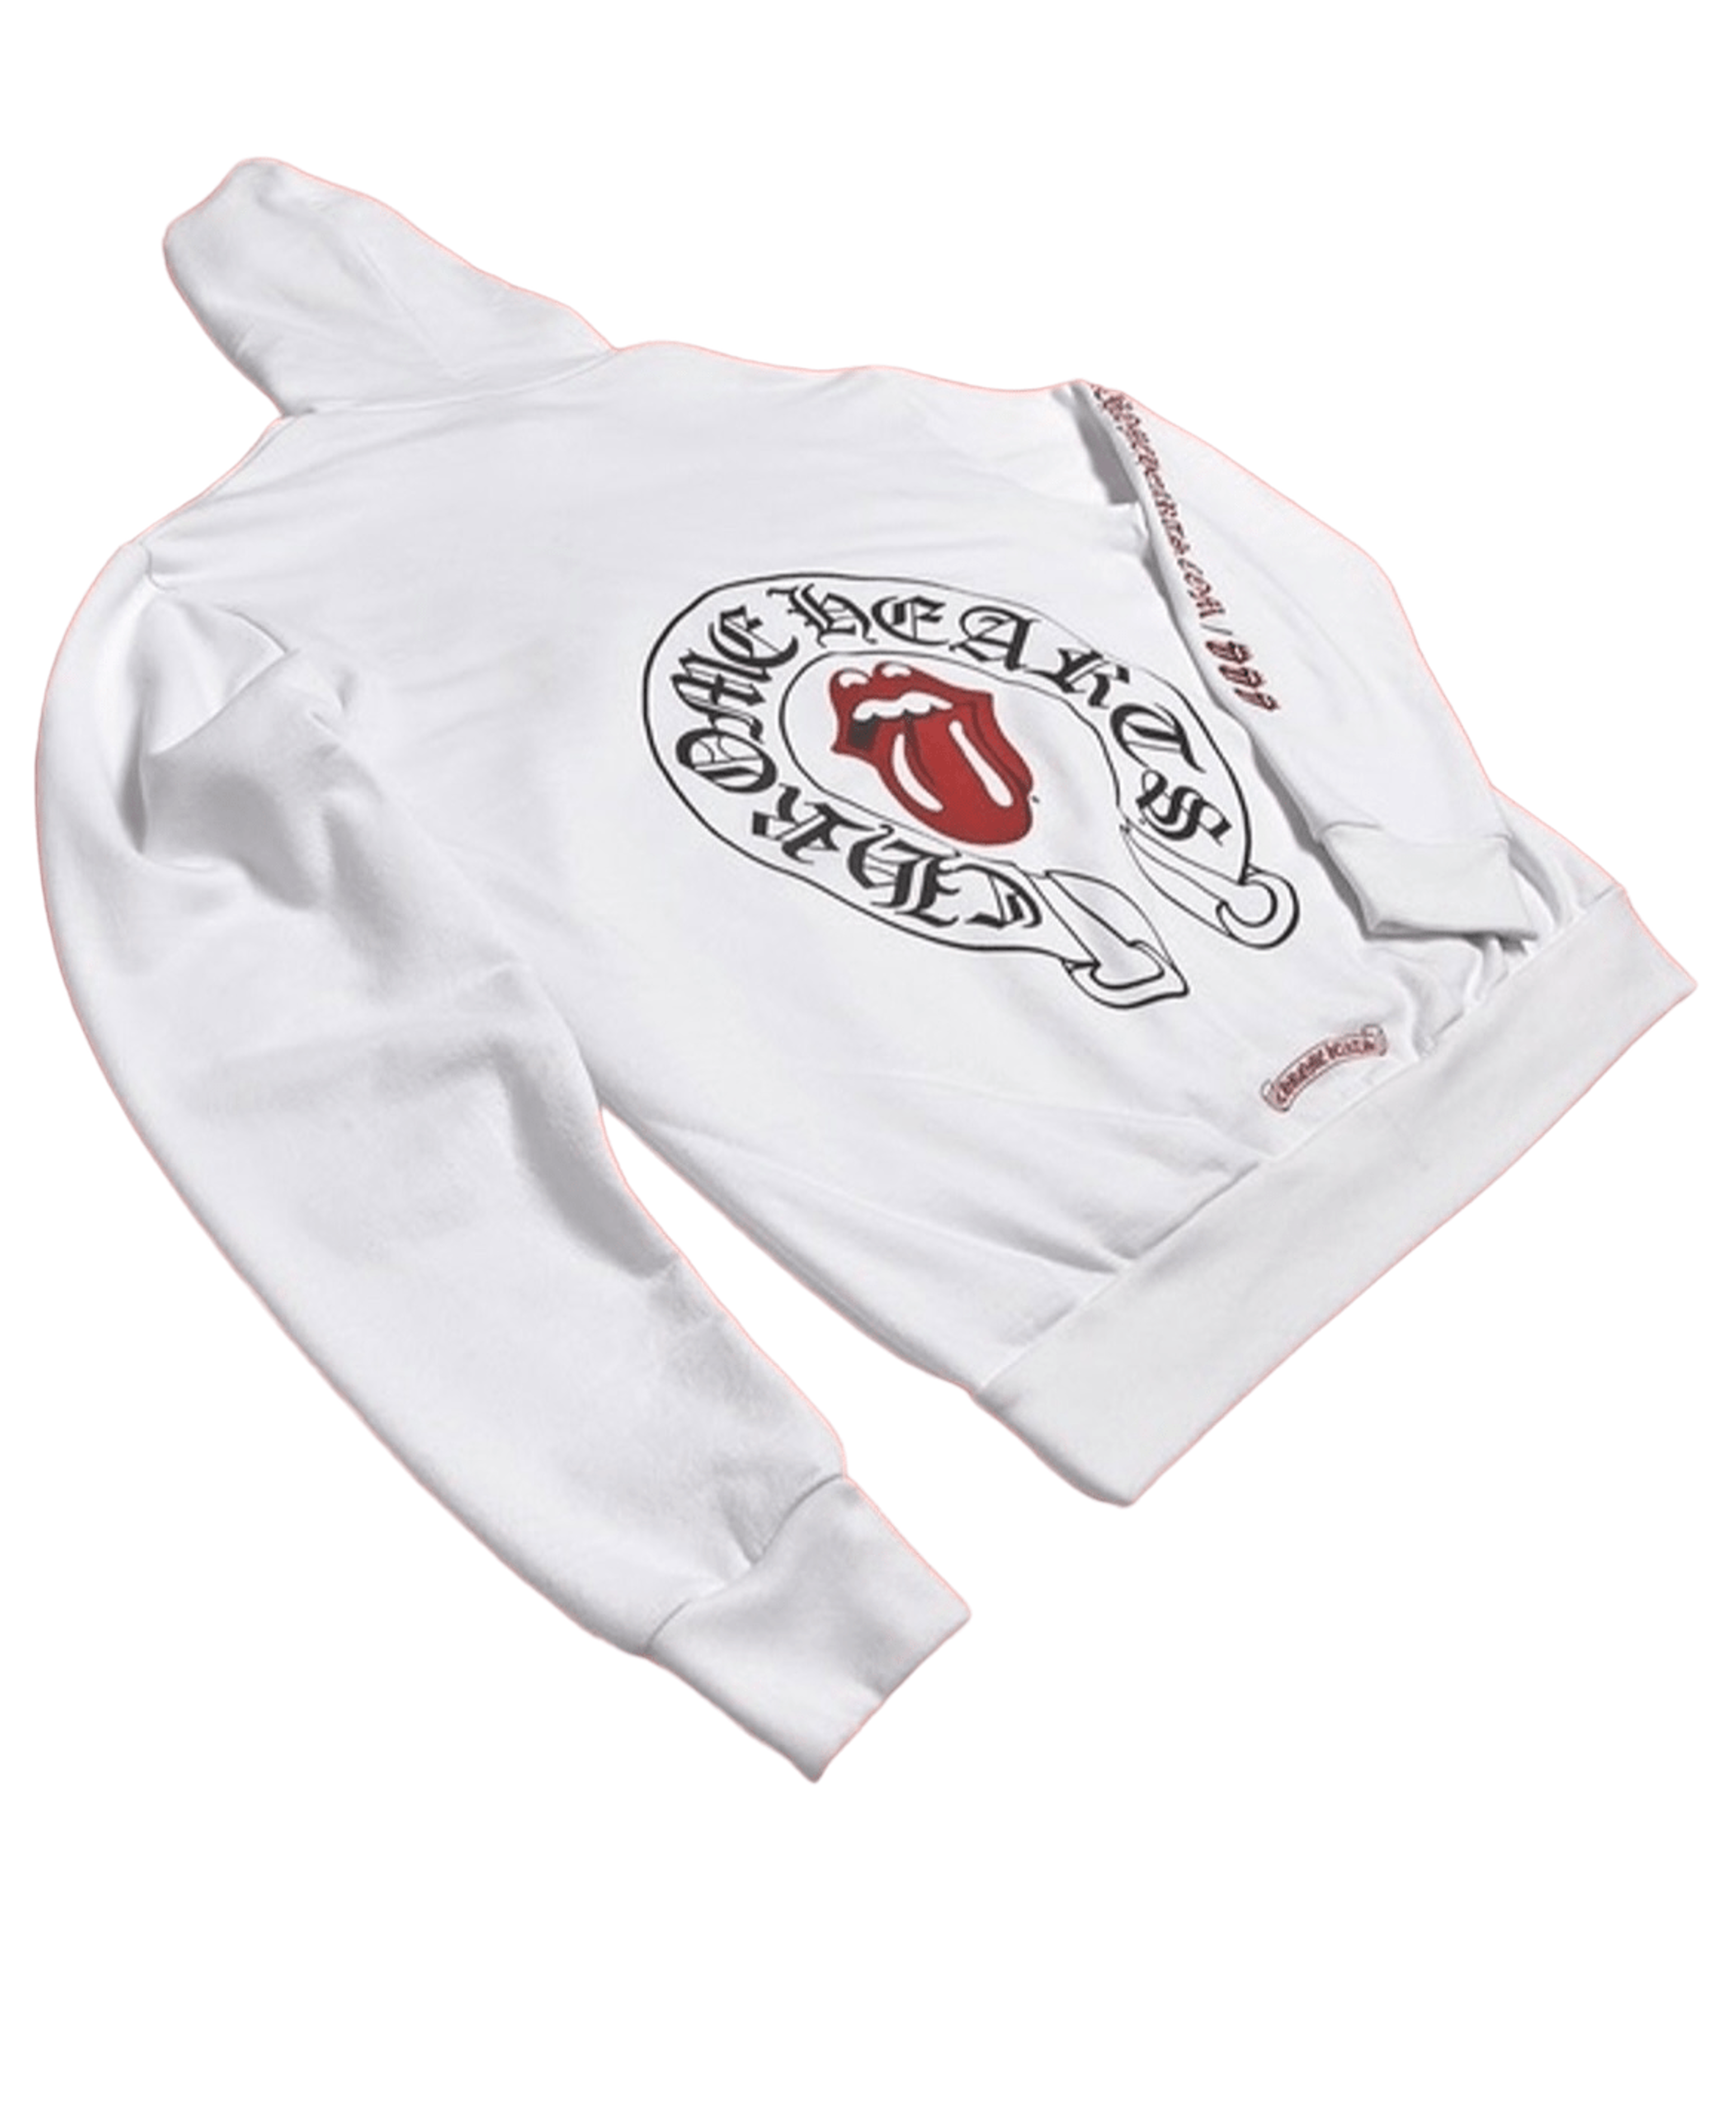 Alternate View 2 of Chrome Hearts Online Exclusive Rolling Stones Hooded Sweatshirt 